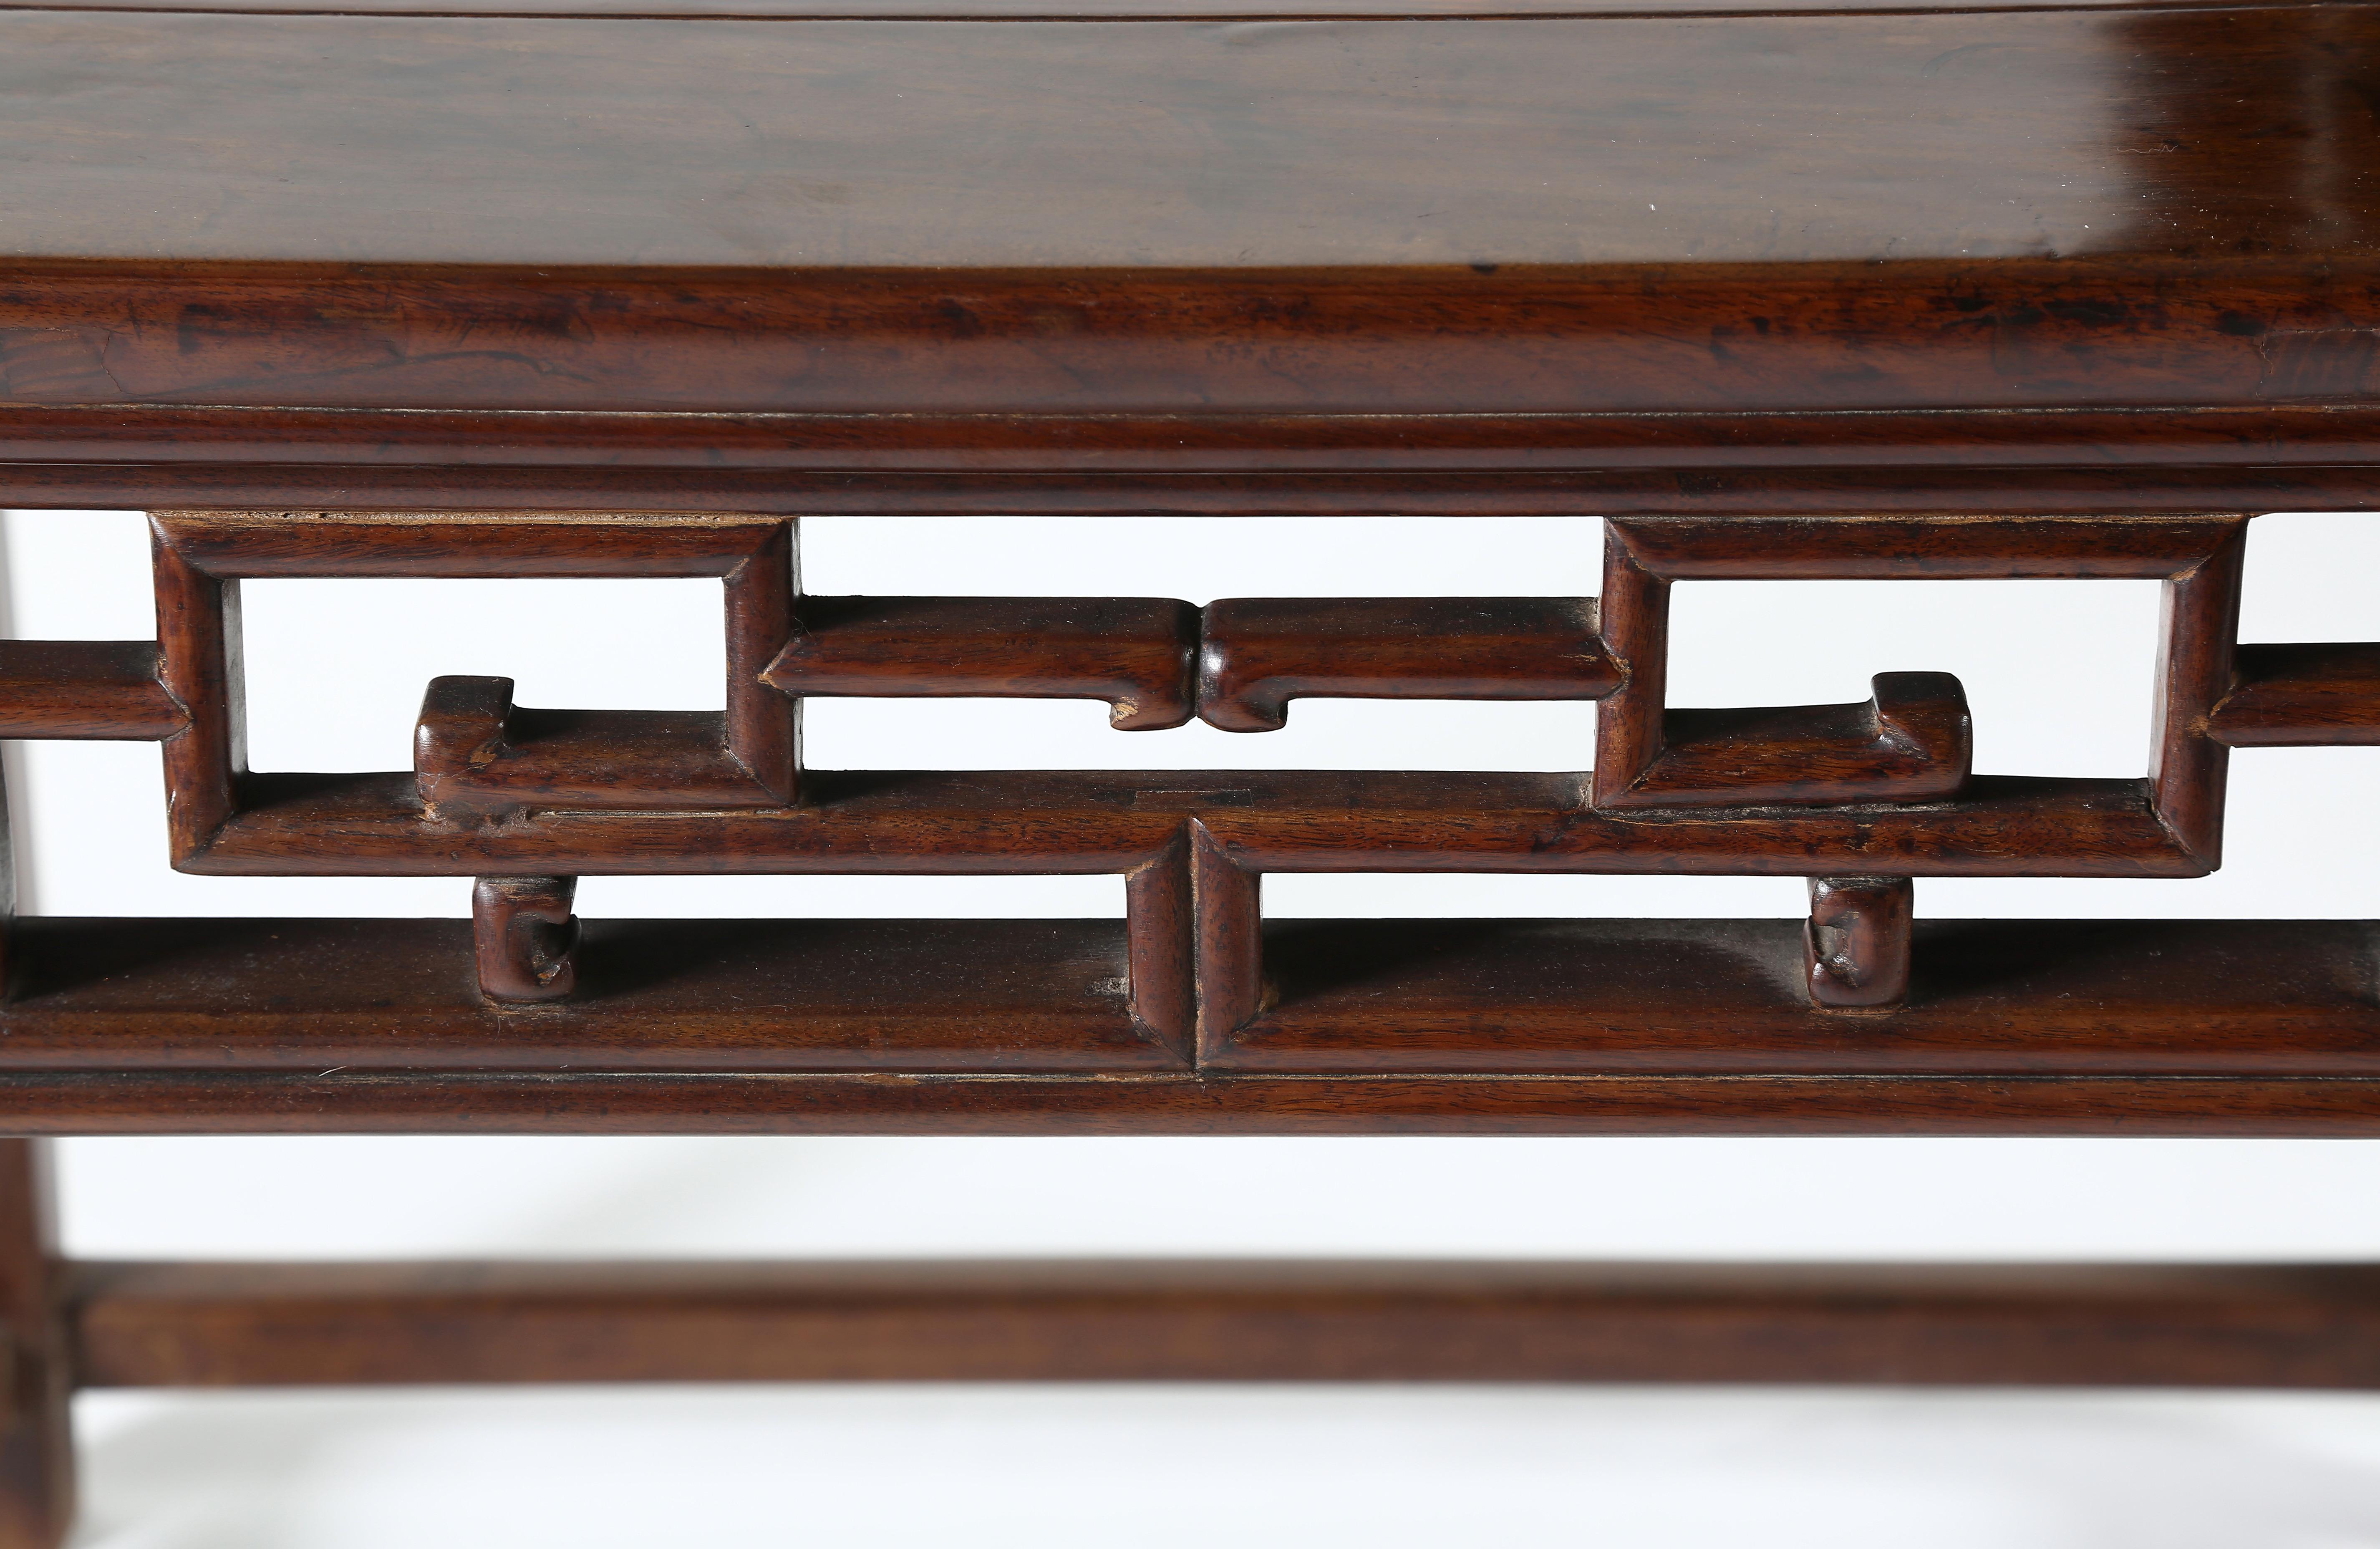 Ming Antique Chinoiserie Walnut Square Display Table with Fretwork Aprons, c. 1800’s For Sale